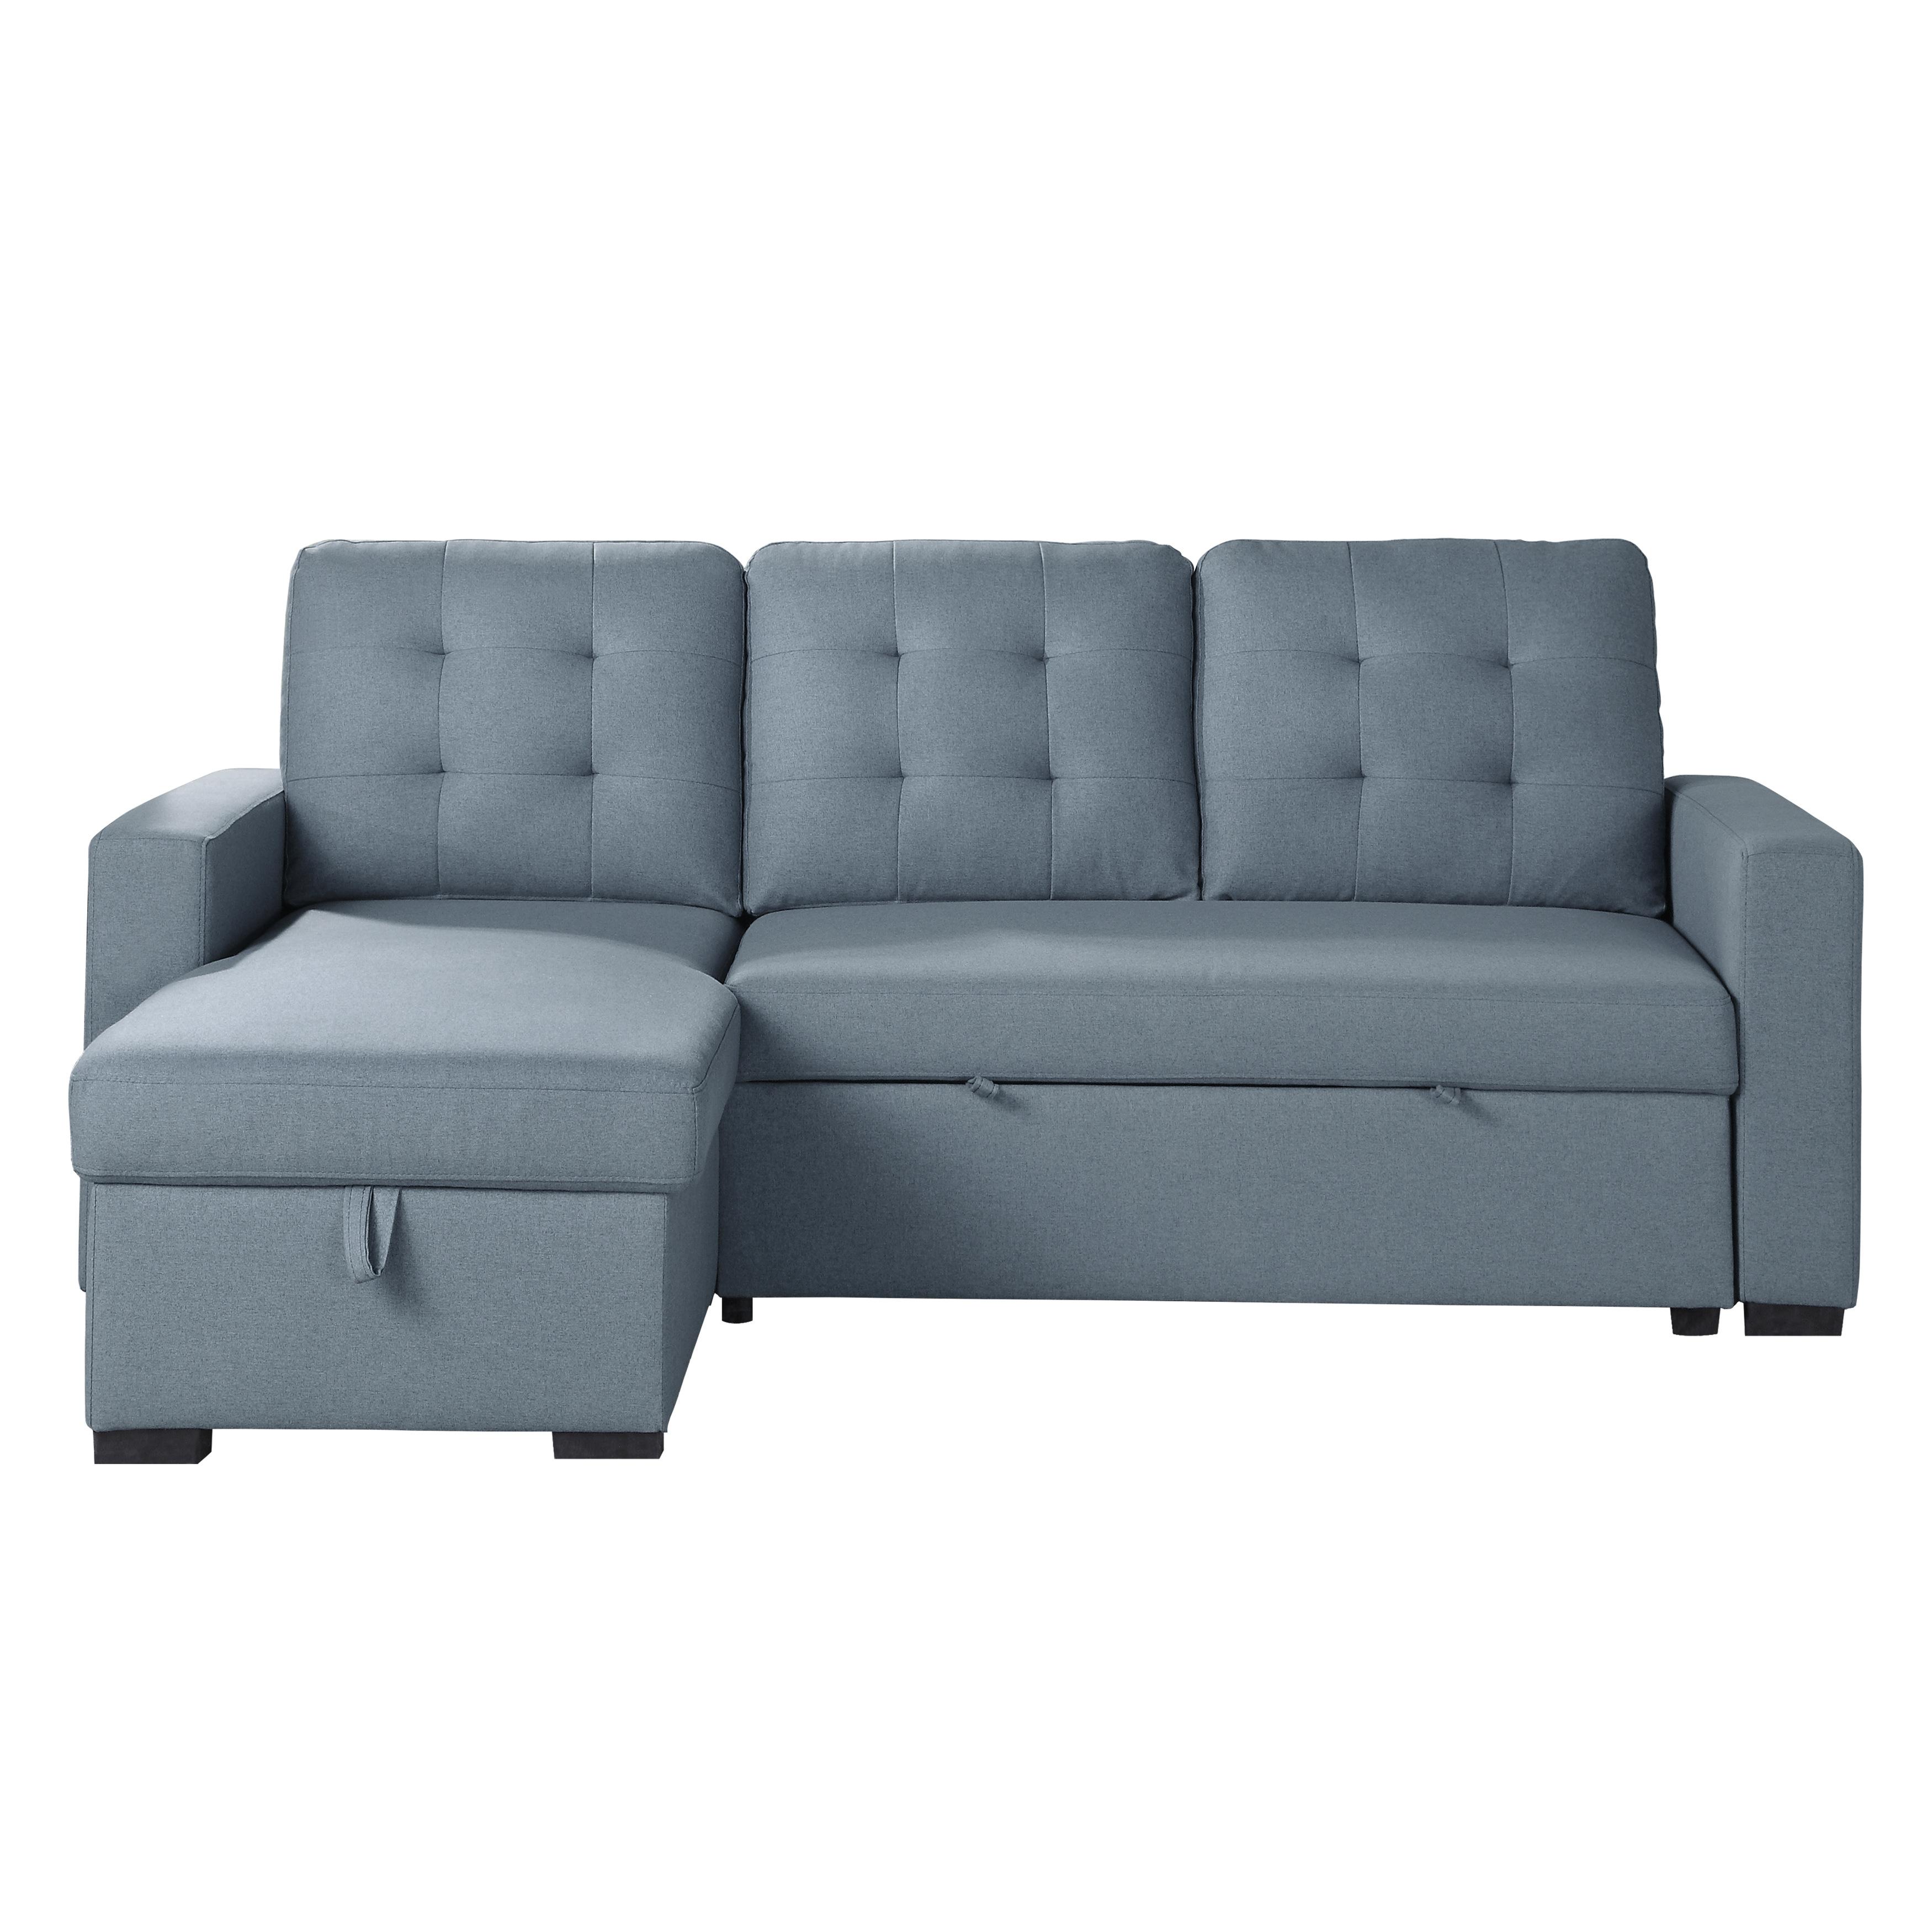 

    
Contemporary Blue Solid Wood Reversible 2-Piece Sectional Homelegance 9314BU*SC Cornish
